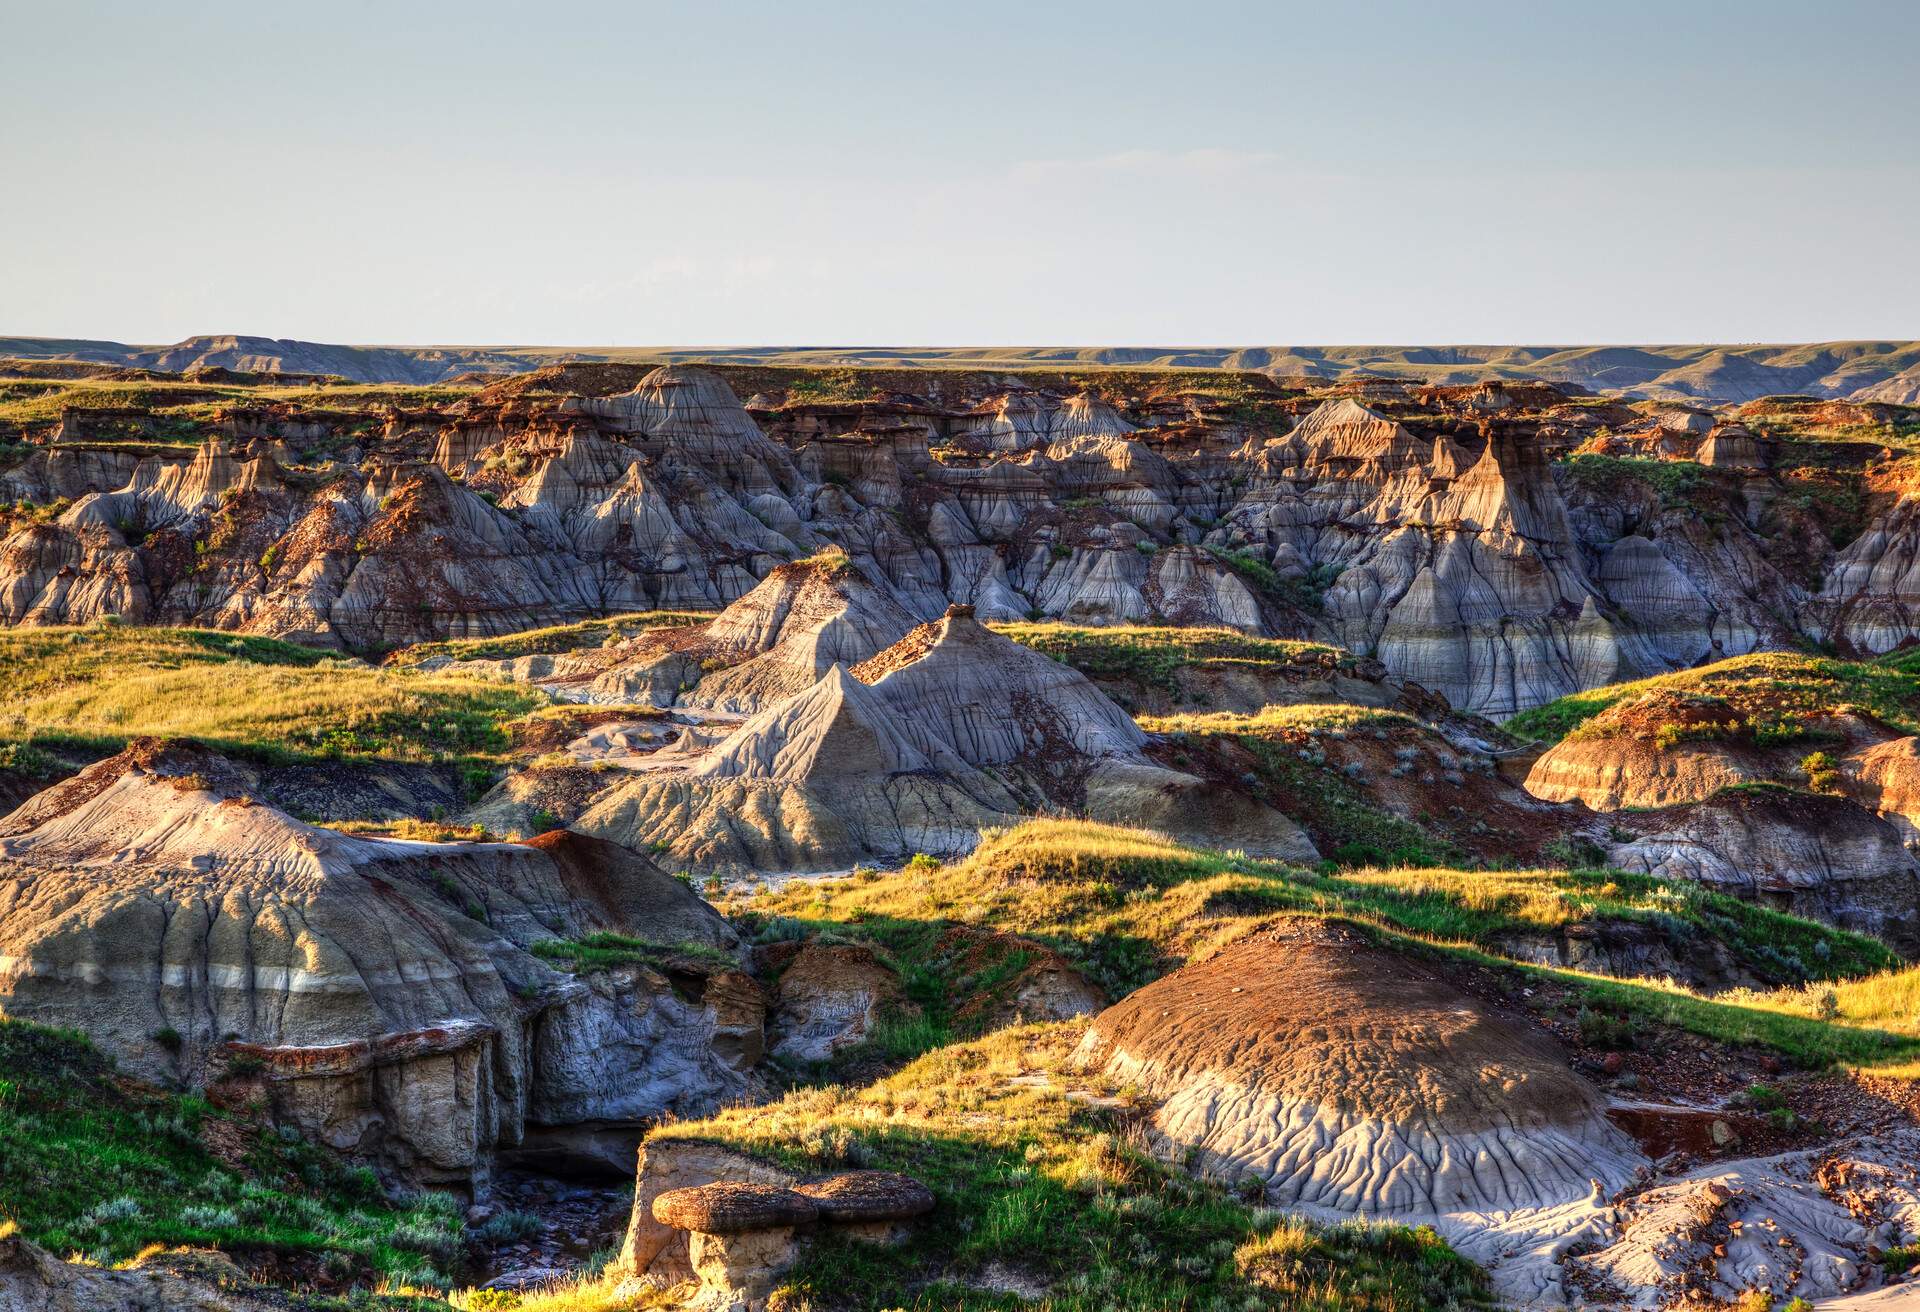 Sun setting over Dinosaur Provincial Park, a UNESCO World Heritage Site in Alberta, Canada. The Alberta badlands is well known for being one of the richest dinosaur fossil locales in the world.